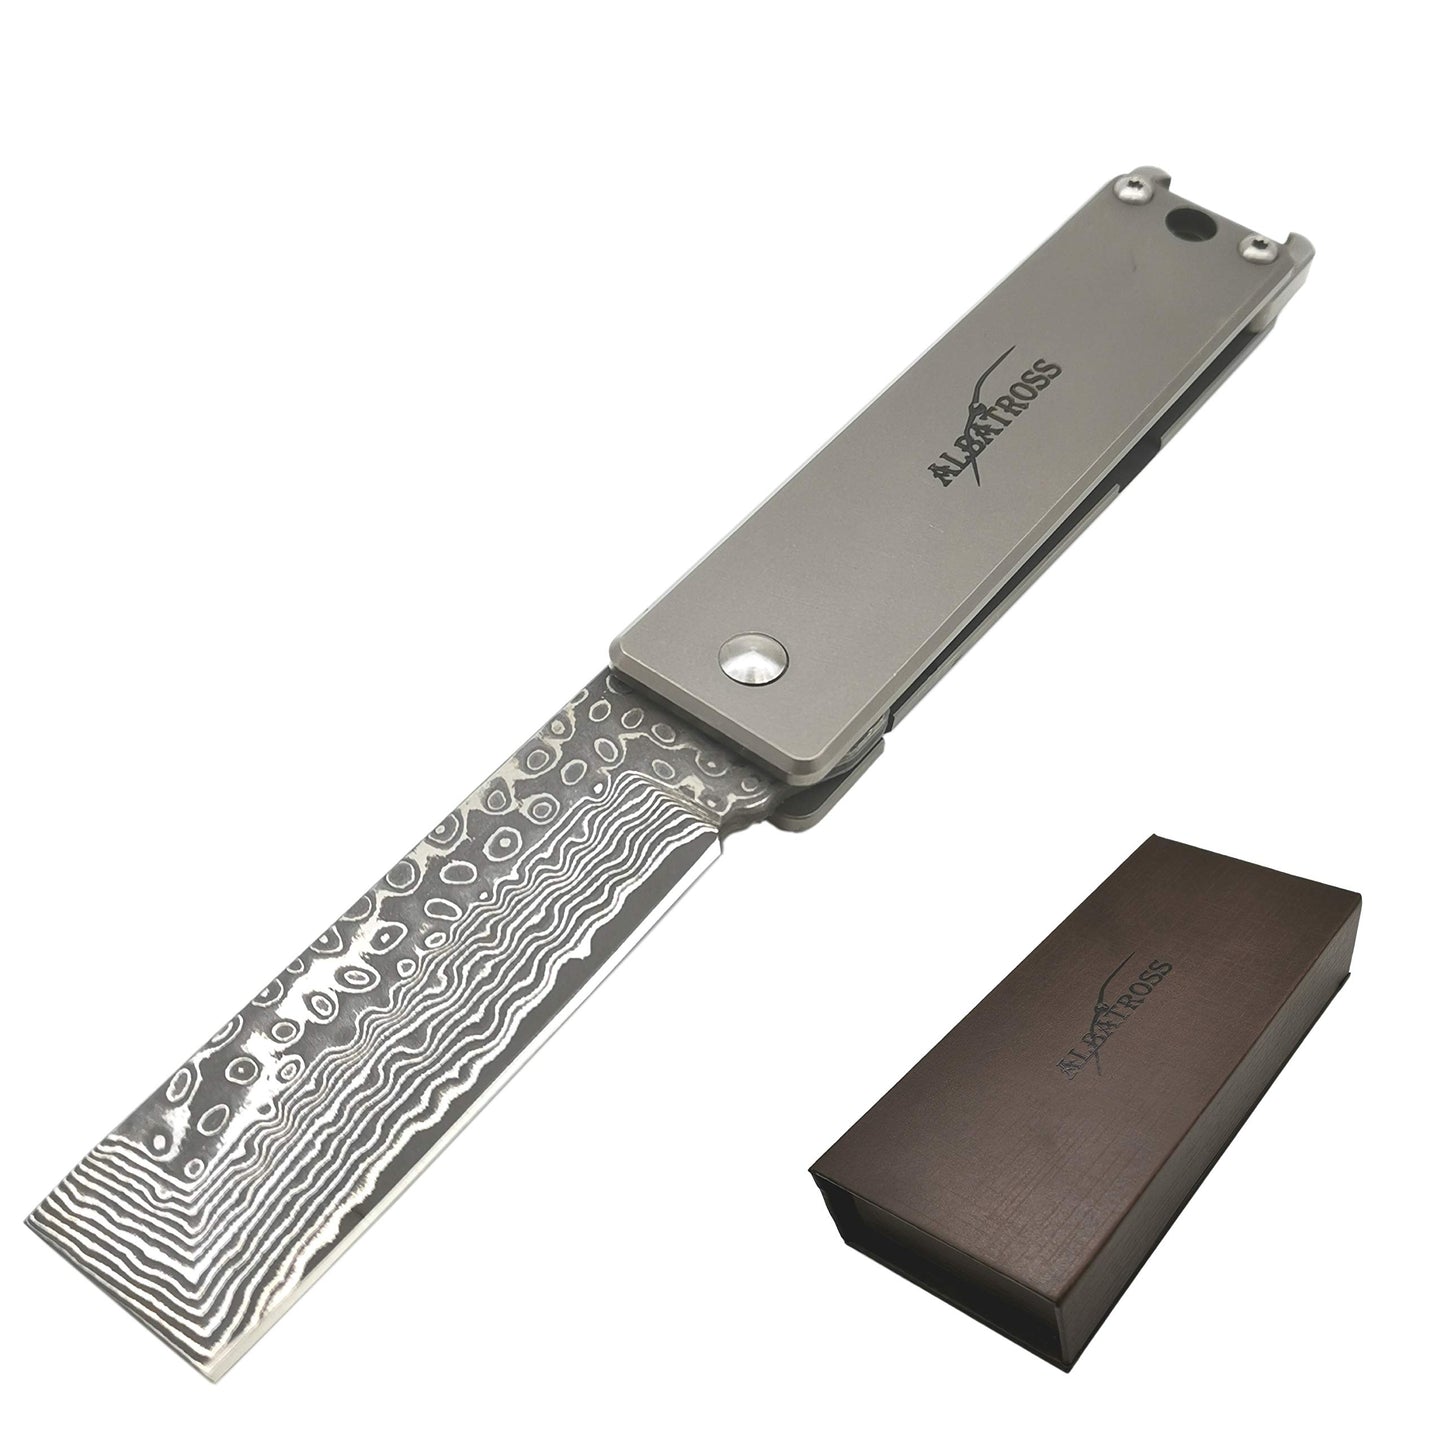 Pocket Knife Titanium Alloy 5.9" Damascus Steel Knife Frame Lock Folding Knife With Bottle Opener, Gifts/Collection - Opticdeals